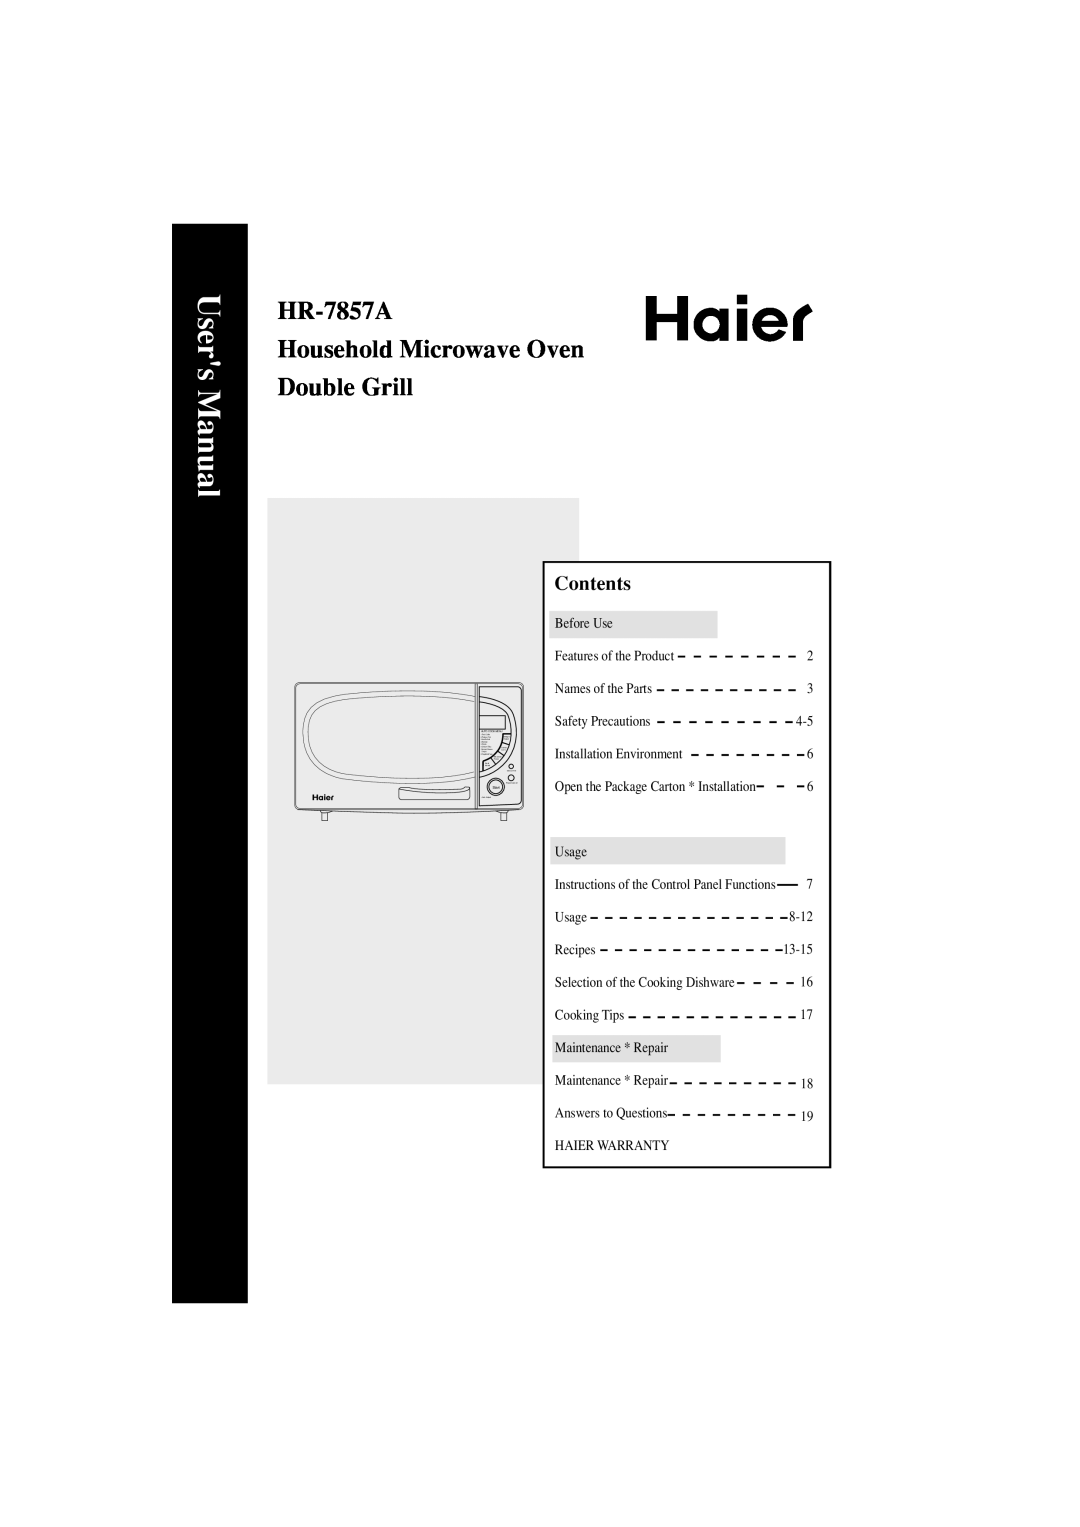 Haier user manual Contents, HR-7857A Household Microwave Oven Double Grill 